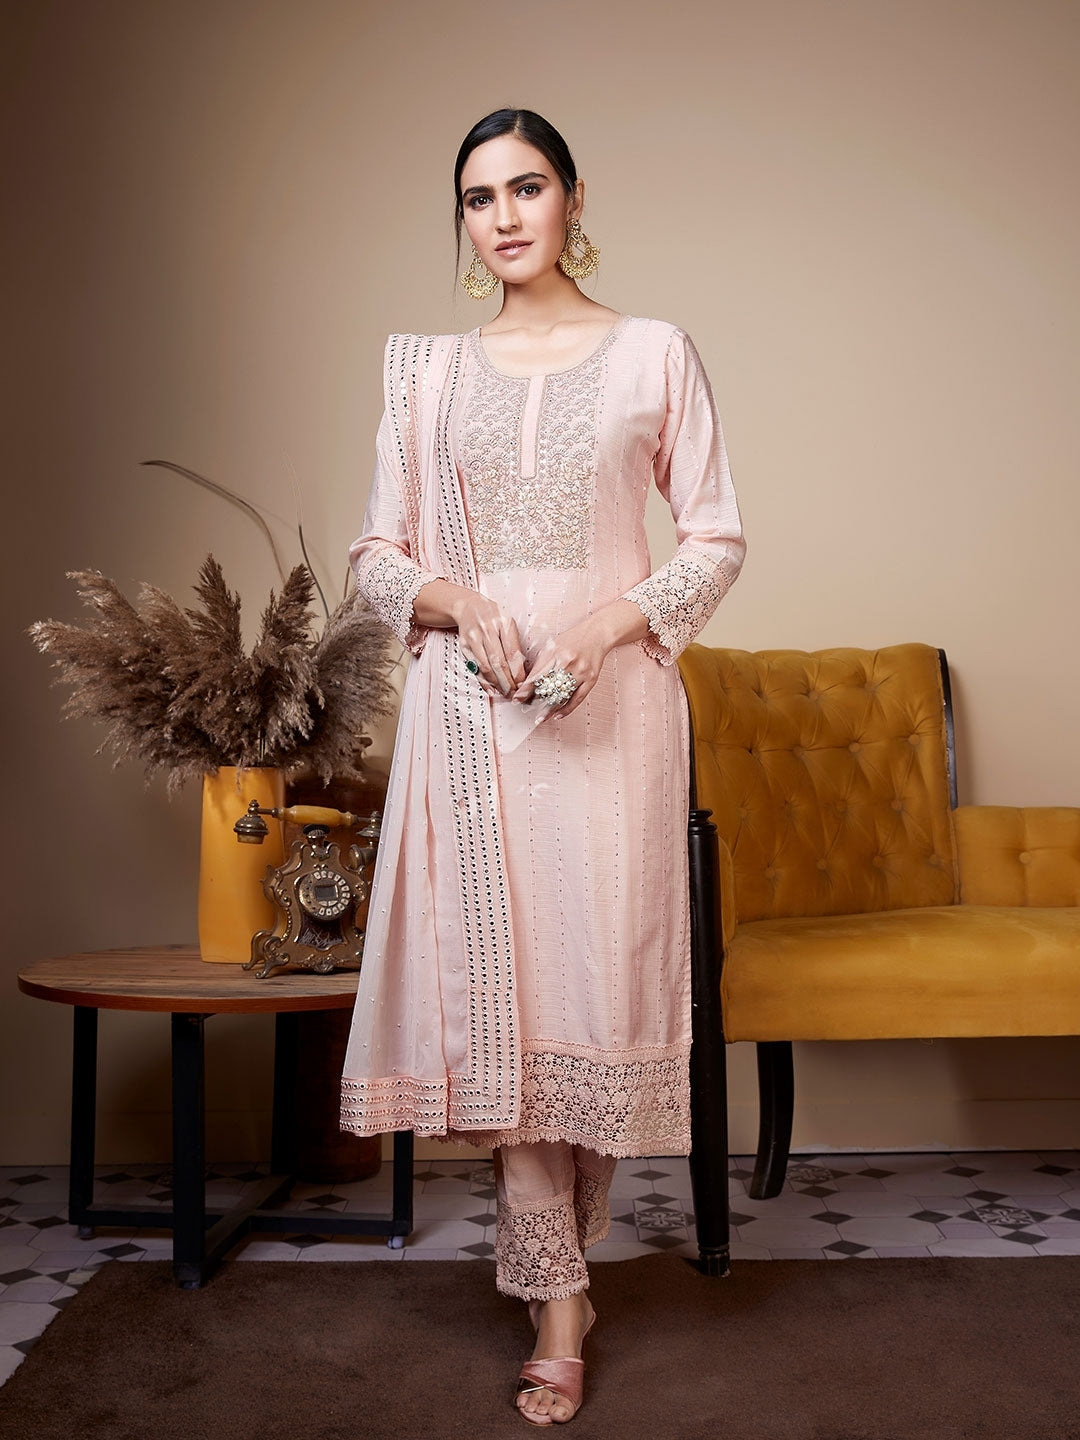 Varsha Paradise Tissue Embroidered Partywear Ladies Suit online